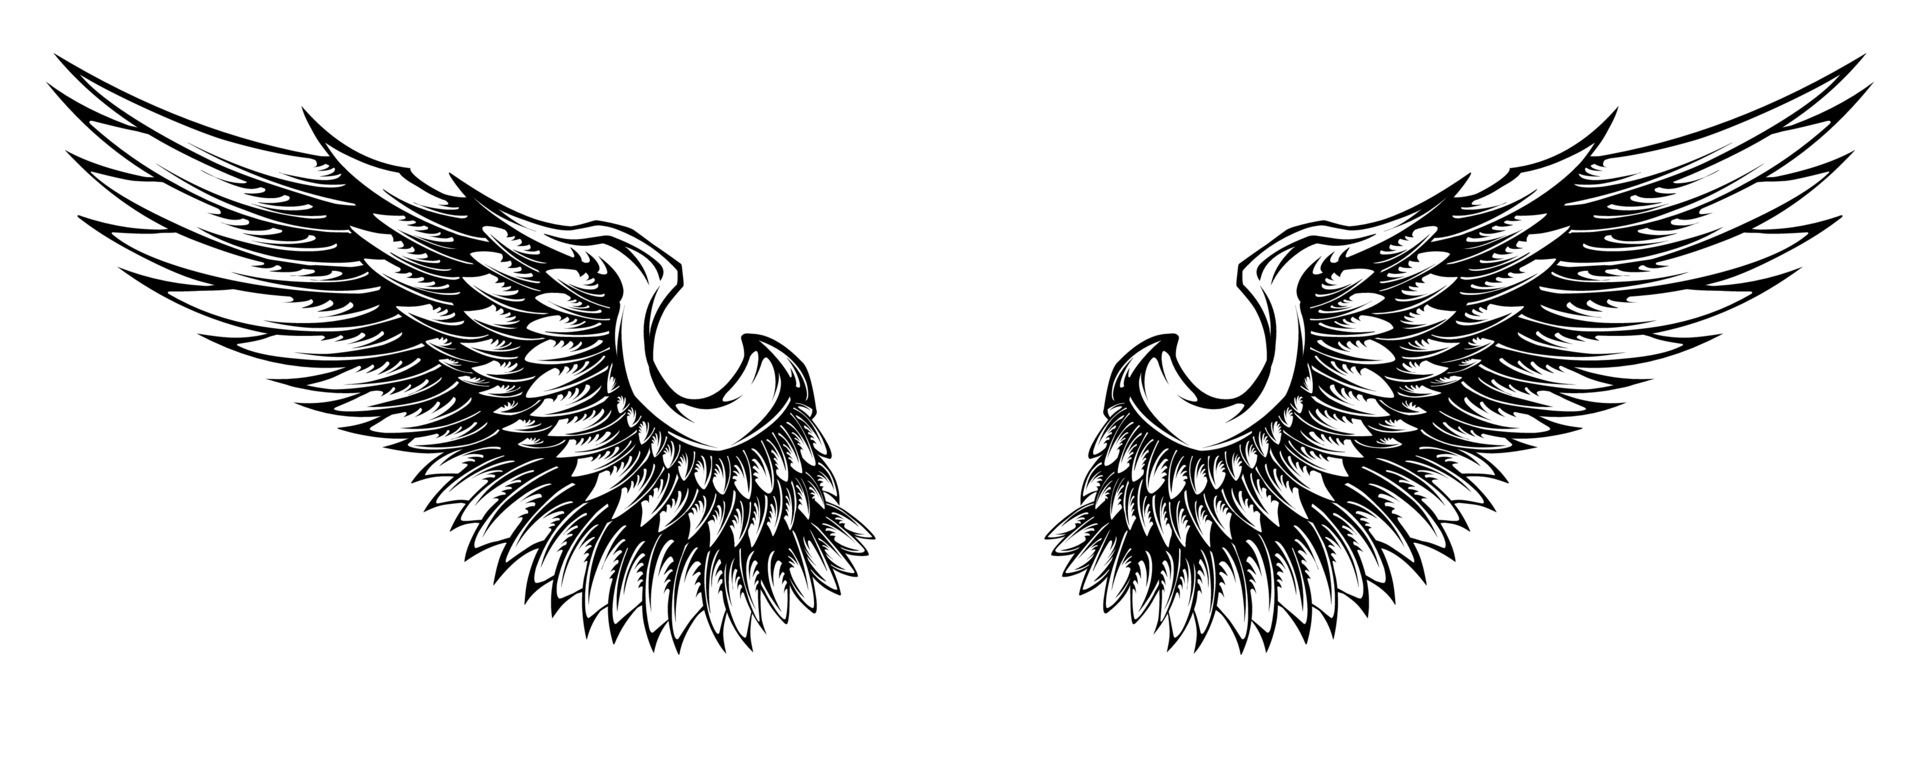 Eagle Wings Tattoo  ClipArt Best